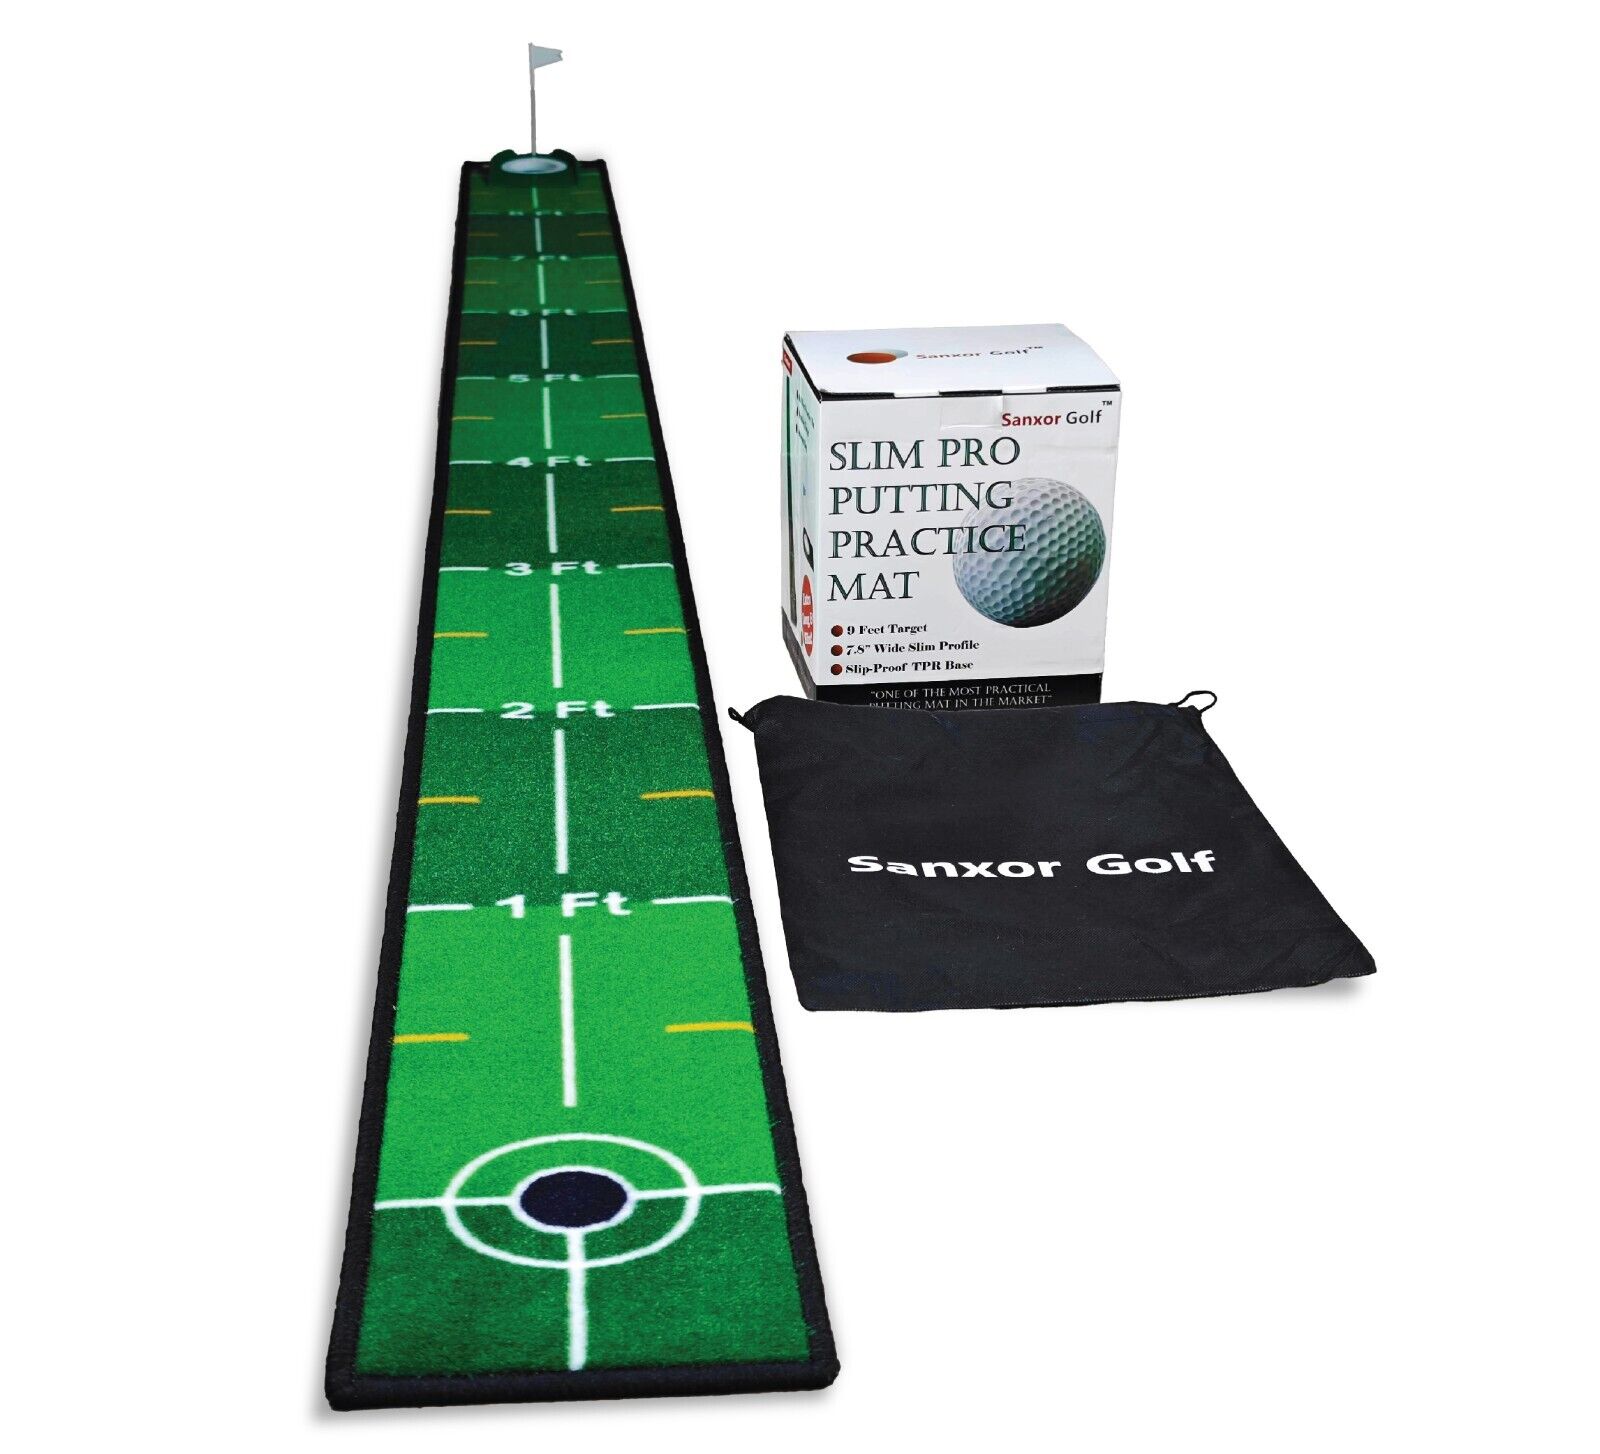 Putting Practice Mat With Practice Target Extra Slim Space Saving 10 Ft